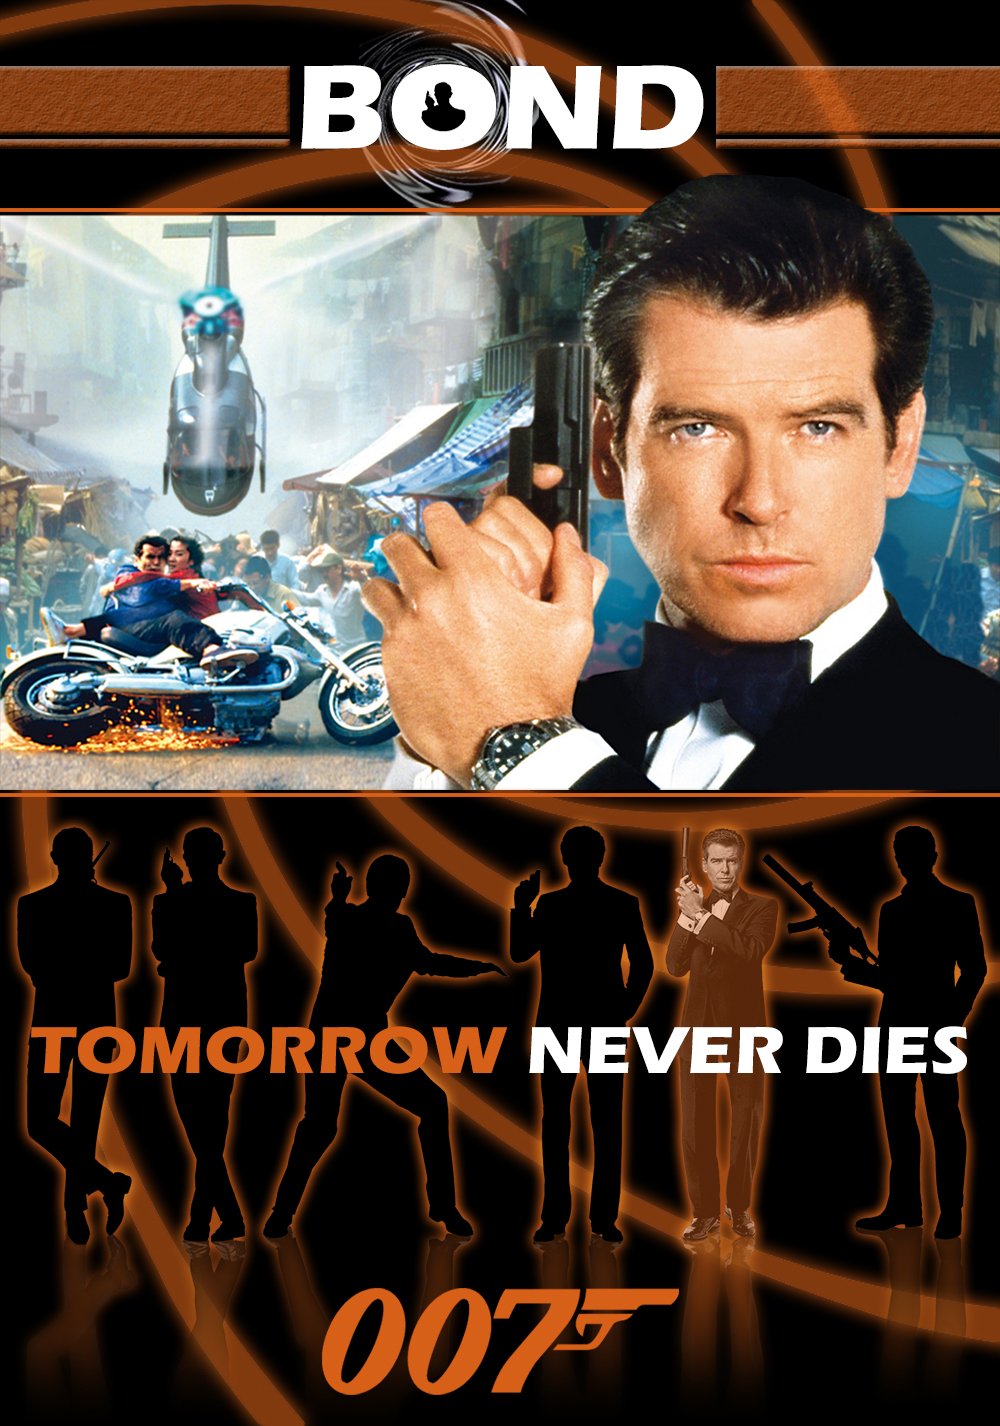 Tomorrow Never Dies Picture - Image Abyss